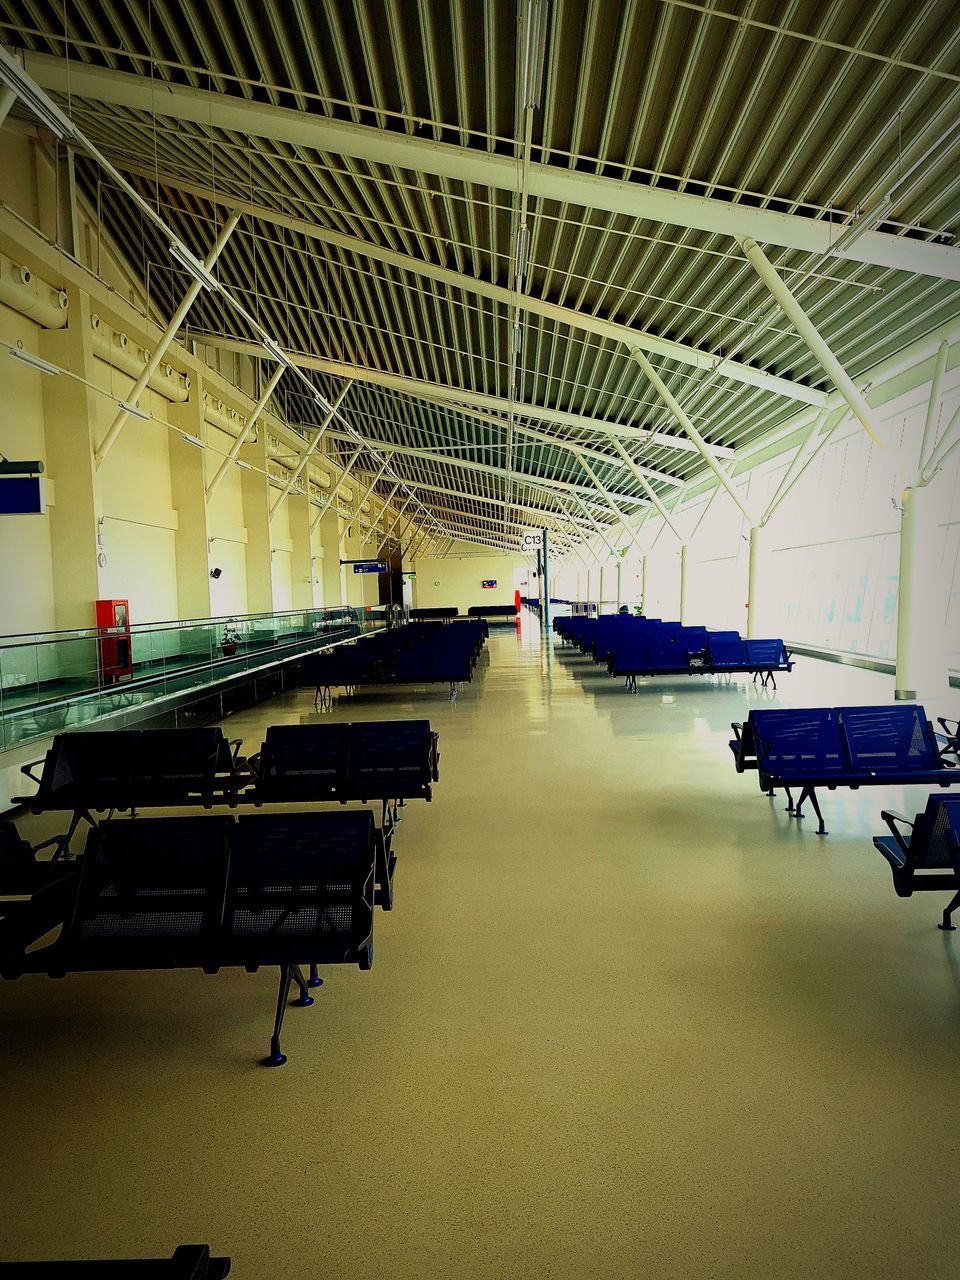 indoors, transportation, architecture, ceiling, hangar, built structure, mode of transportation, transport, airport, aviation, no people, airport departure area, travel, airplane, seat, air vehicle